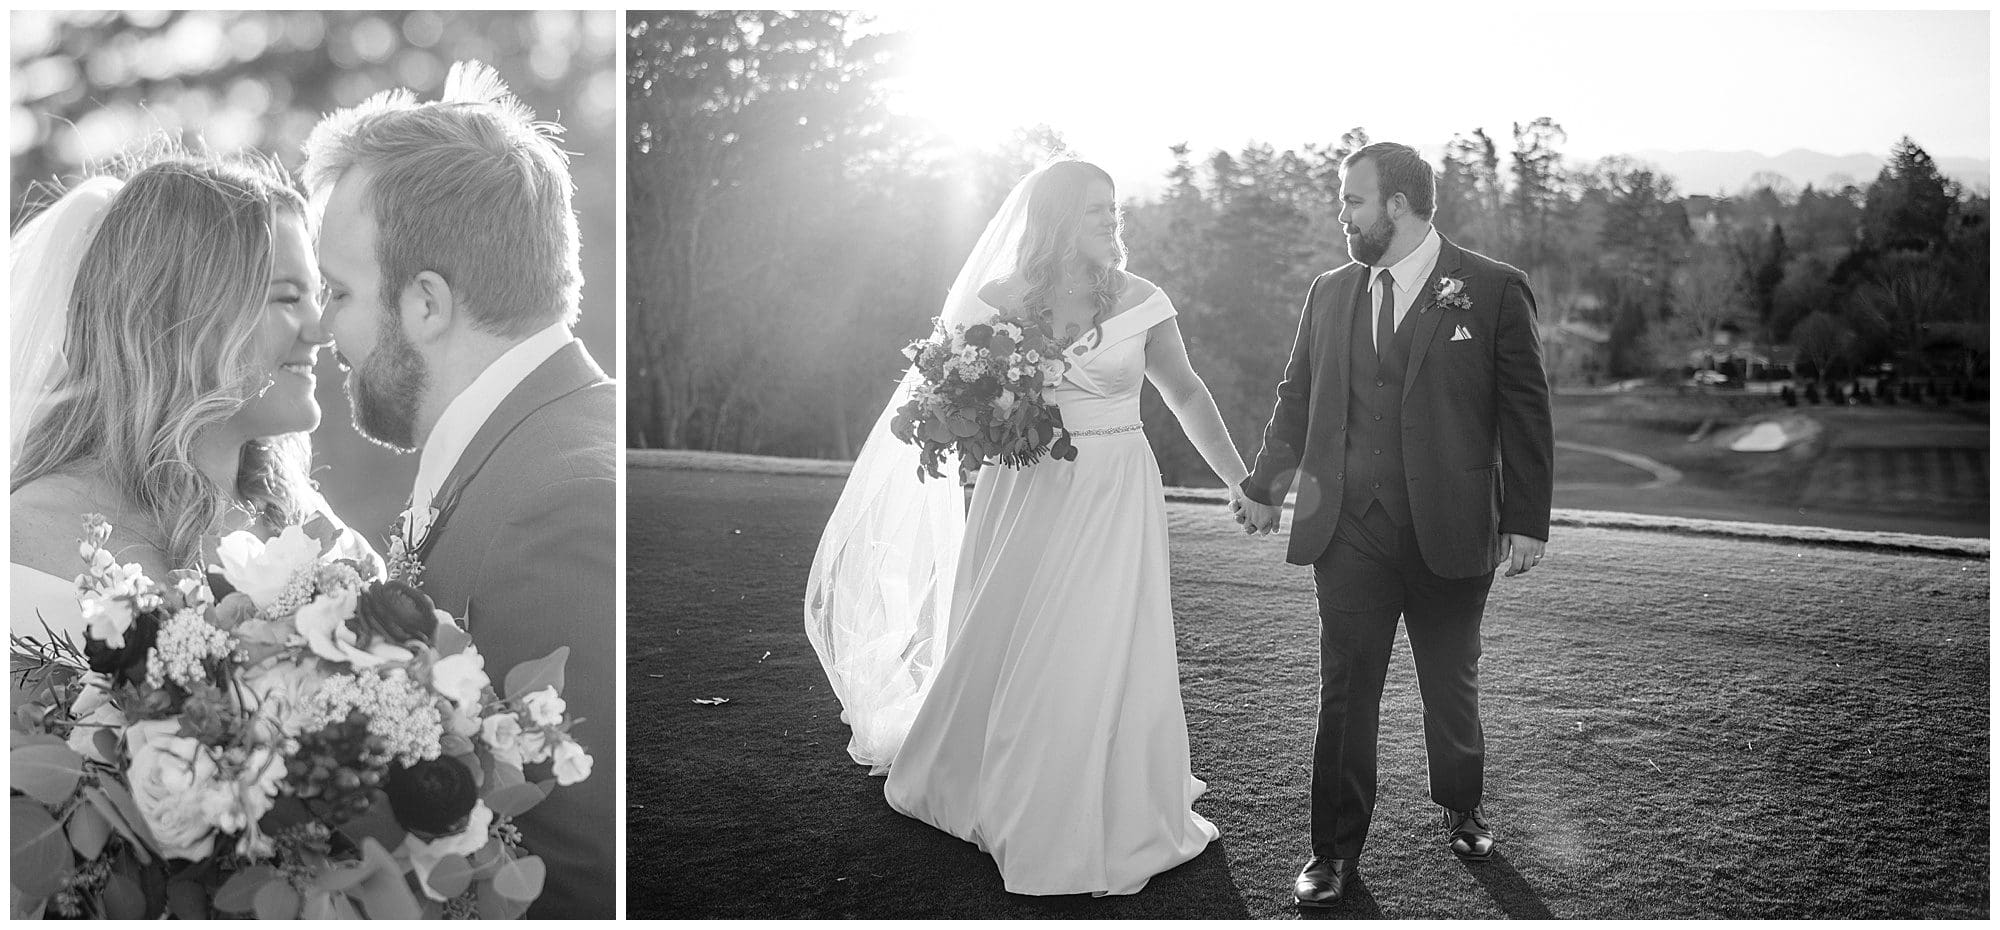 Two black and white photos of a bride and groom holding hands.